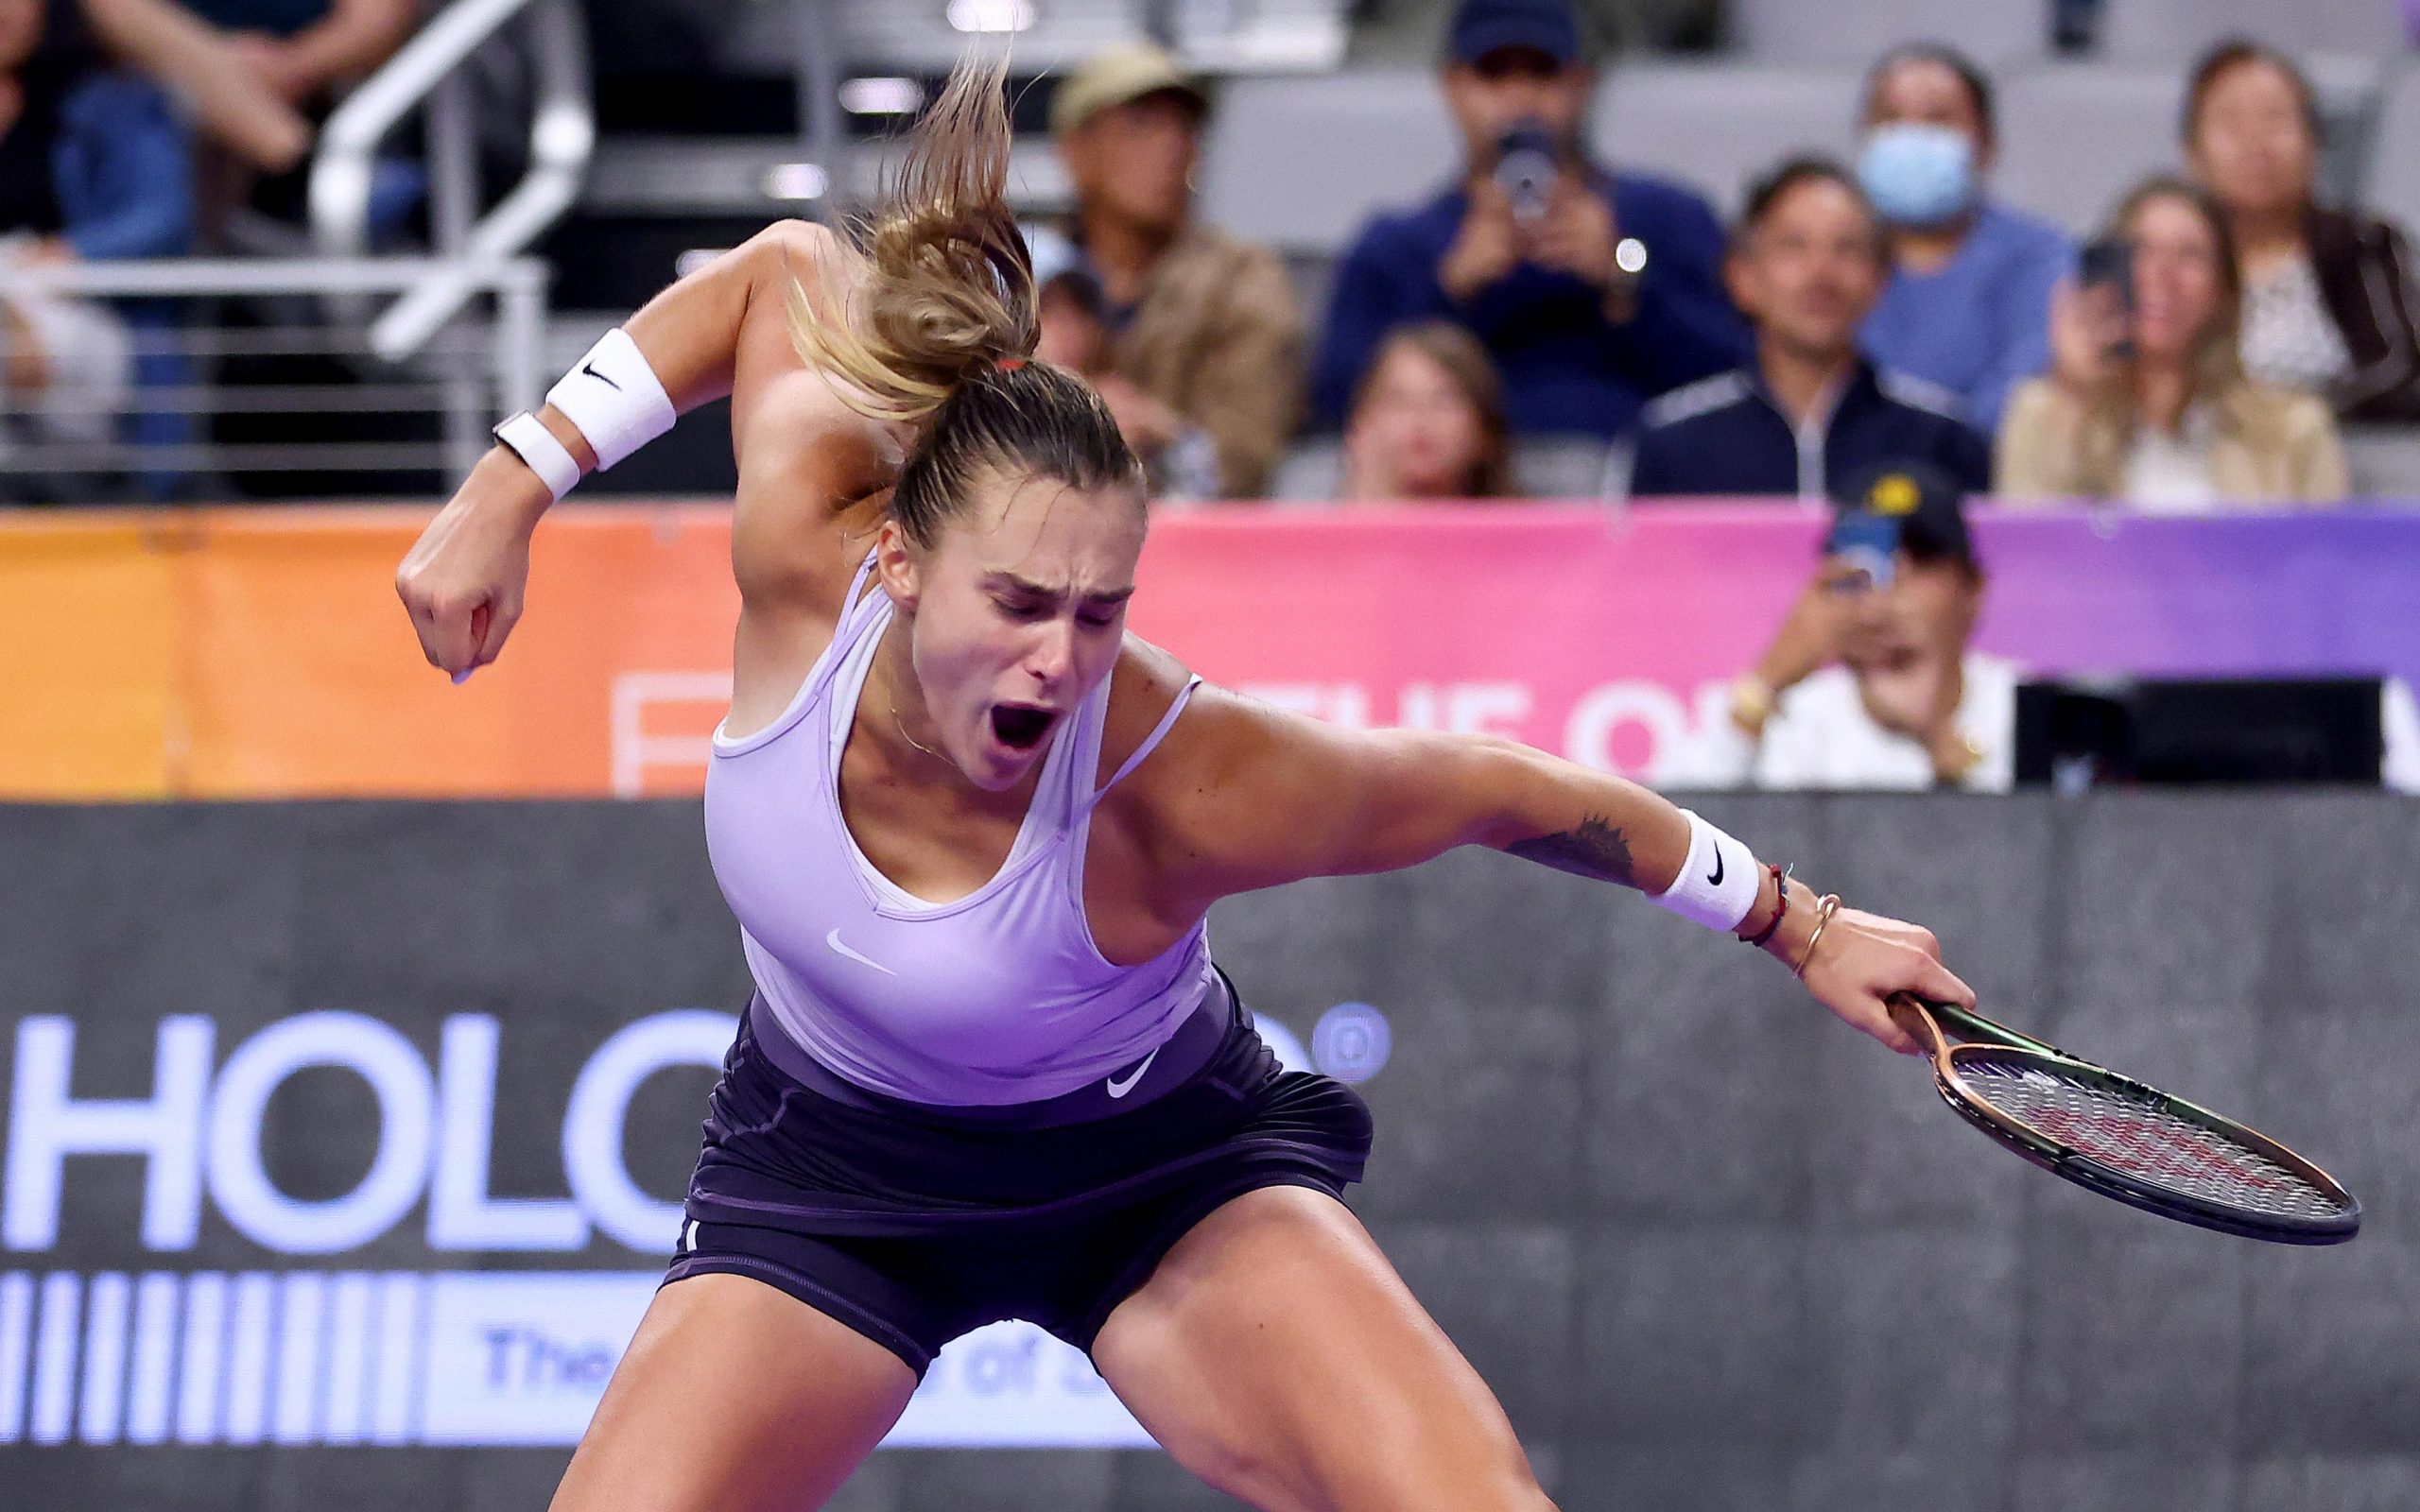 Courtside Chronicles: Unforgettable Highlights from Women's Tennis